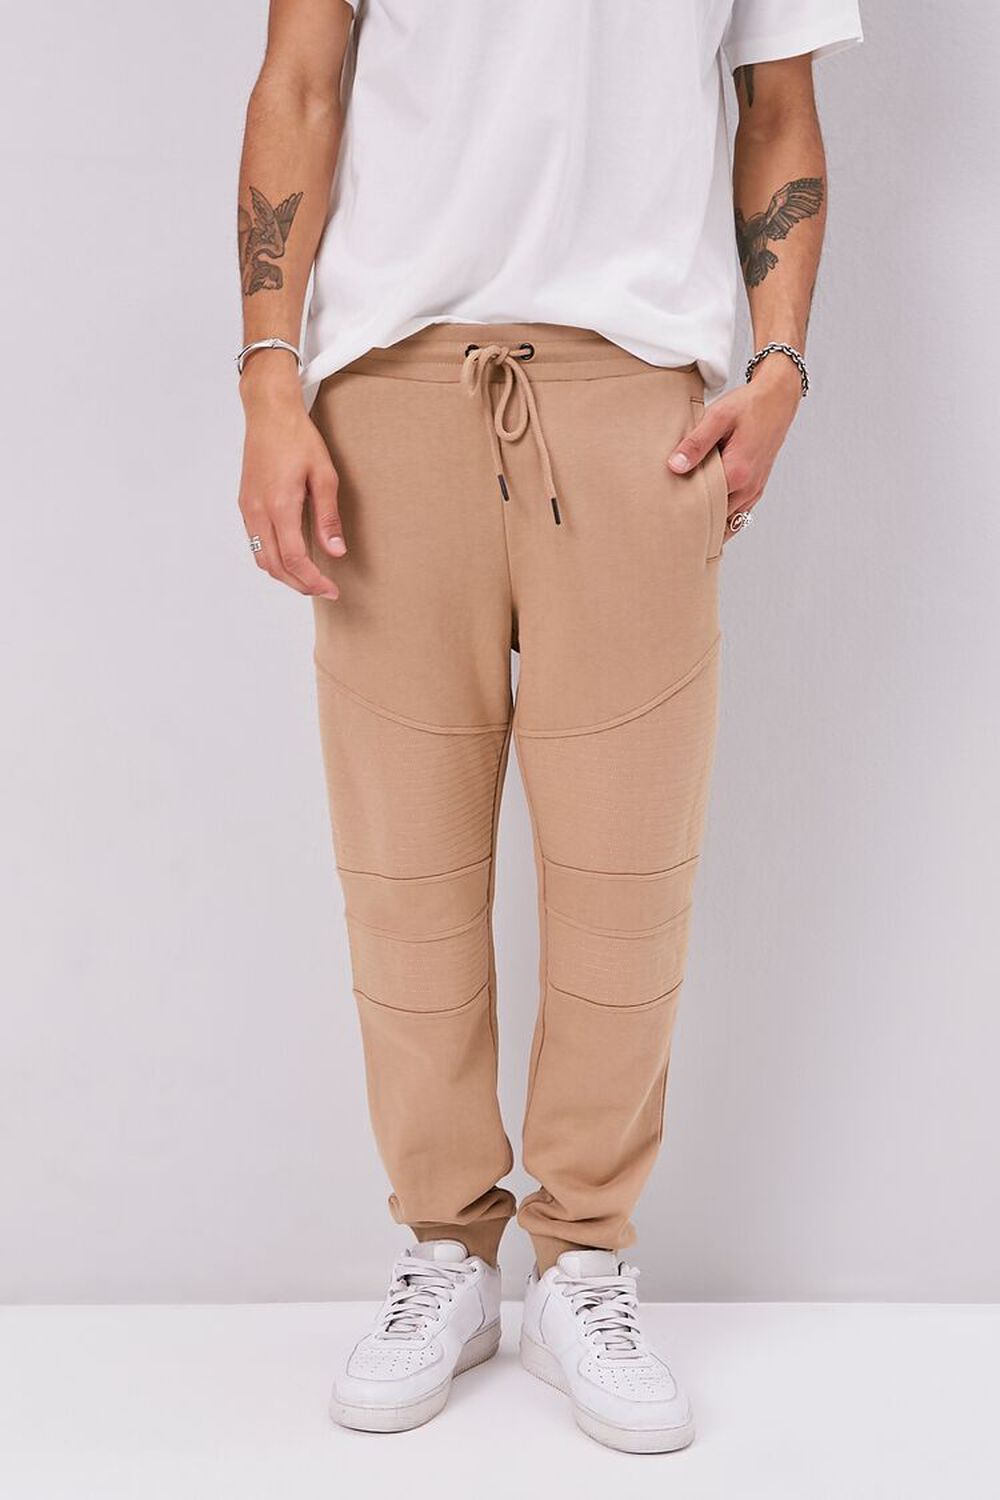 TAUPE French Terry Drawstring Moto Joggers, image 2